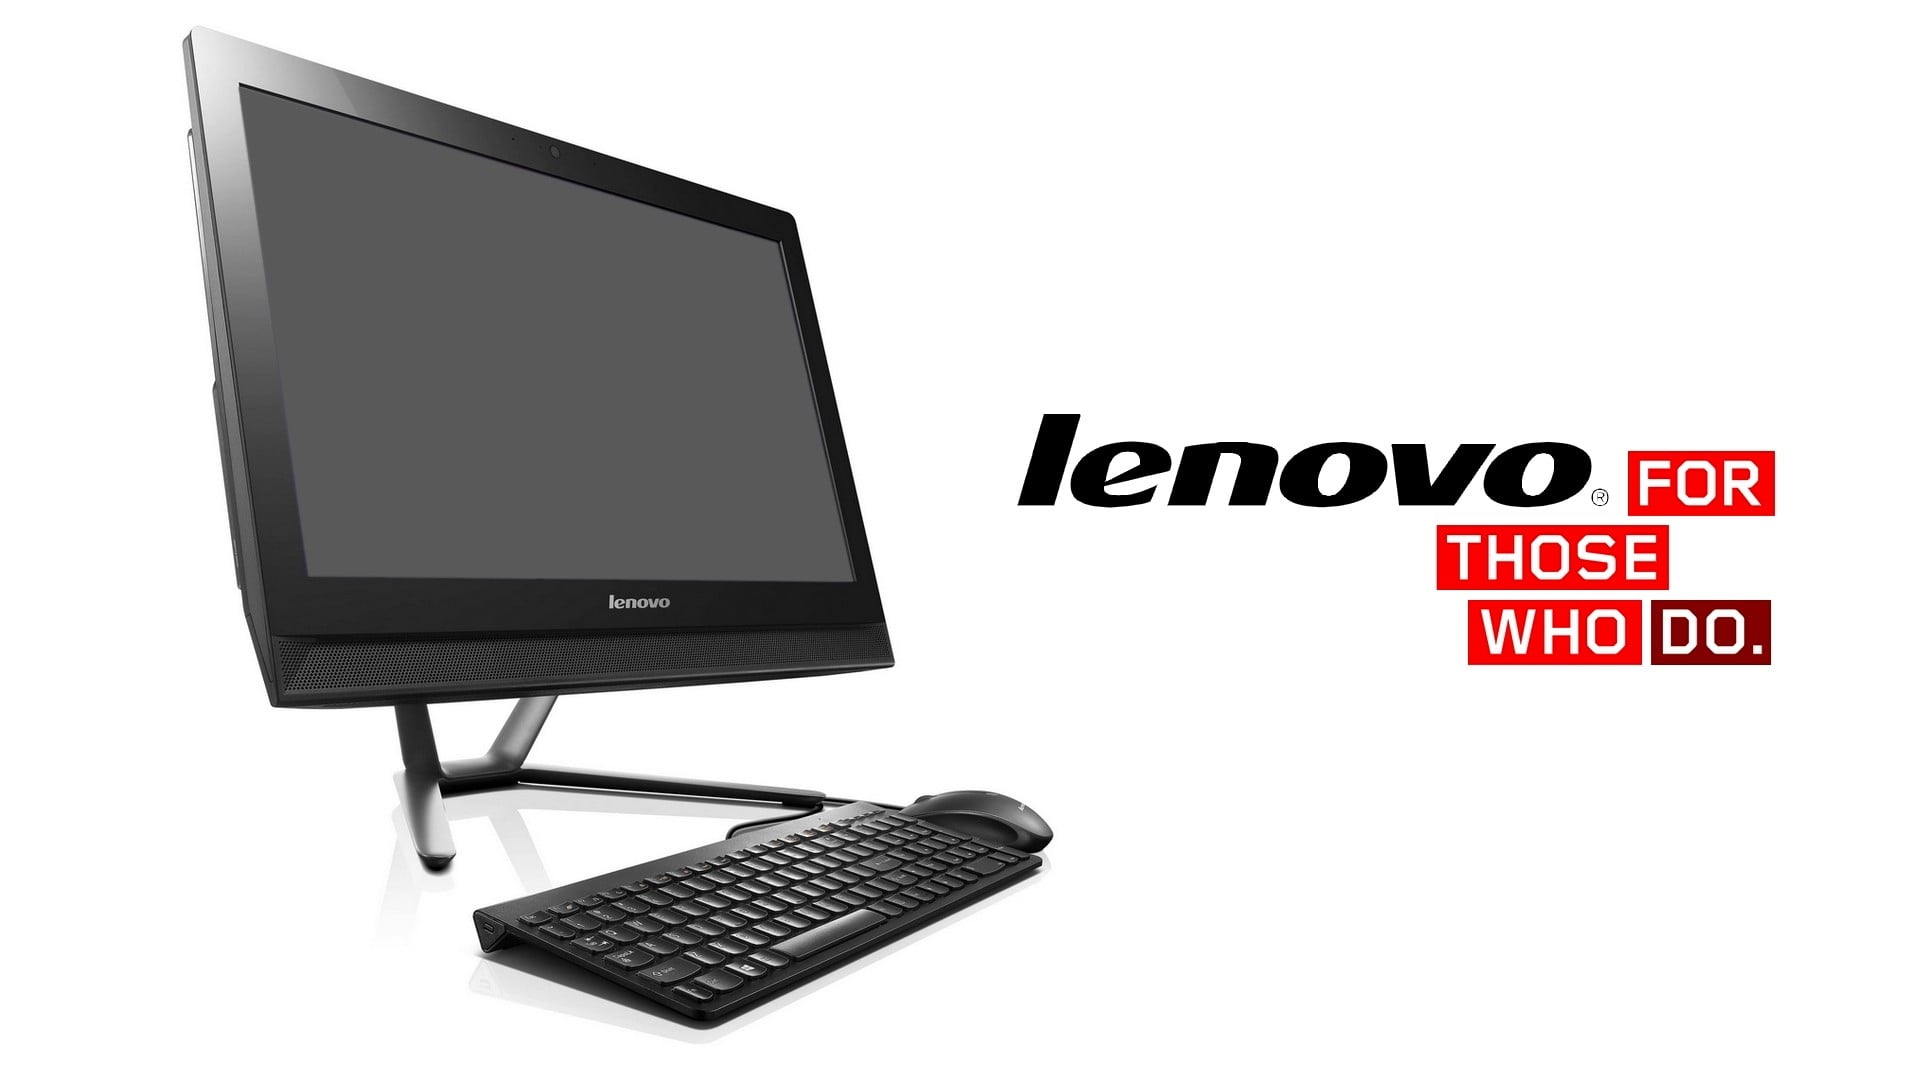 Lenovo flat screen computer monitor, keyboard, and mouse, All in One Pc